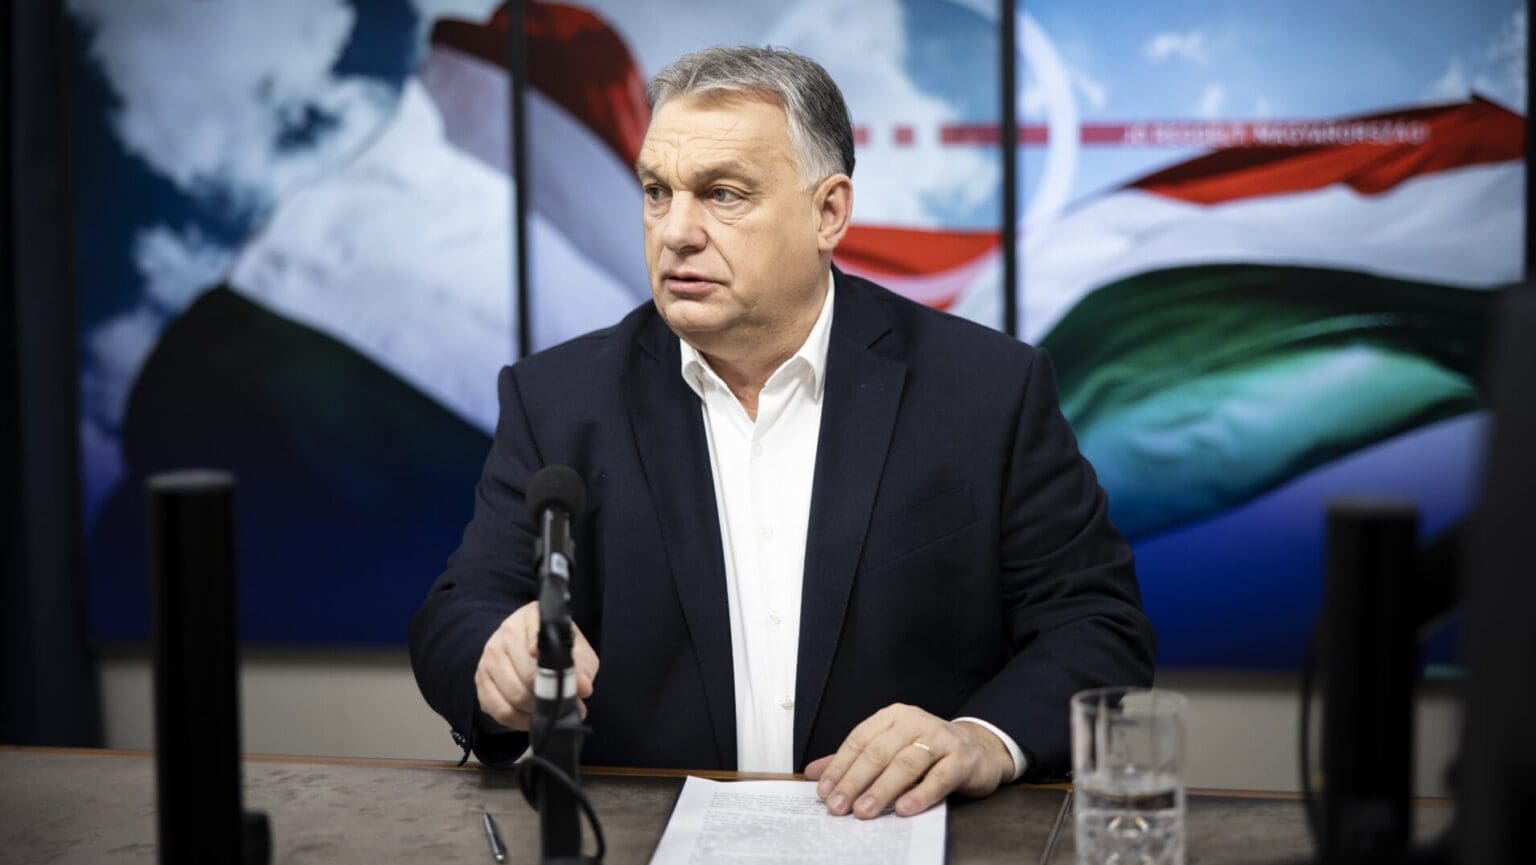 Viktor Orbán: The Hungarian People Will Again Be Proven Right